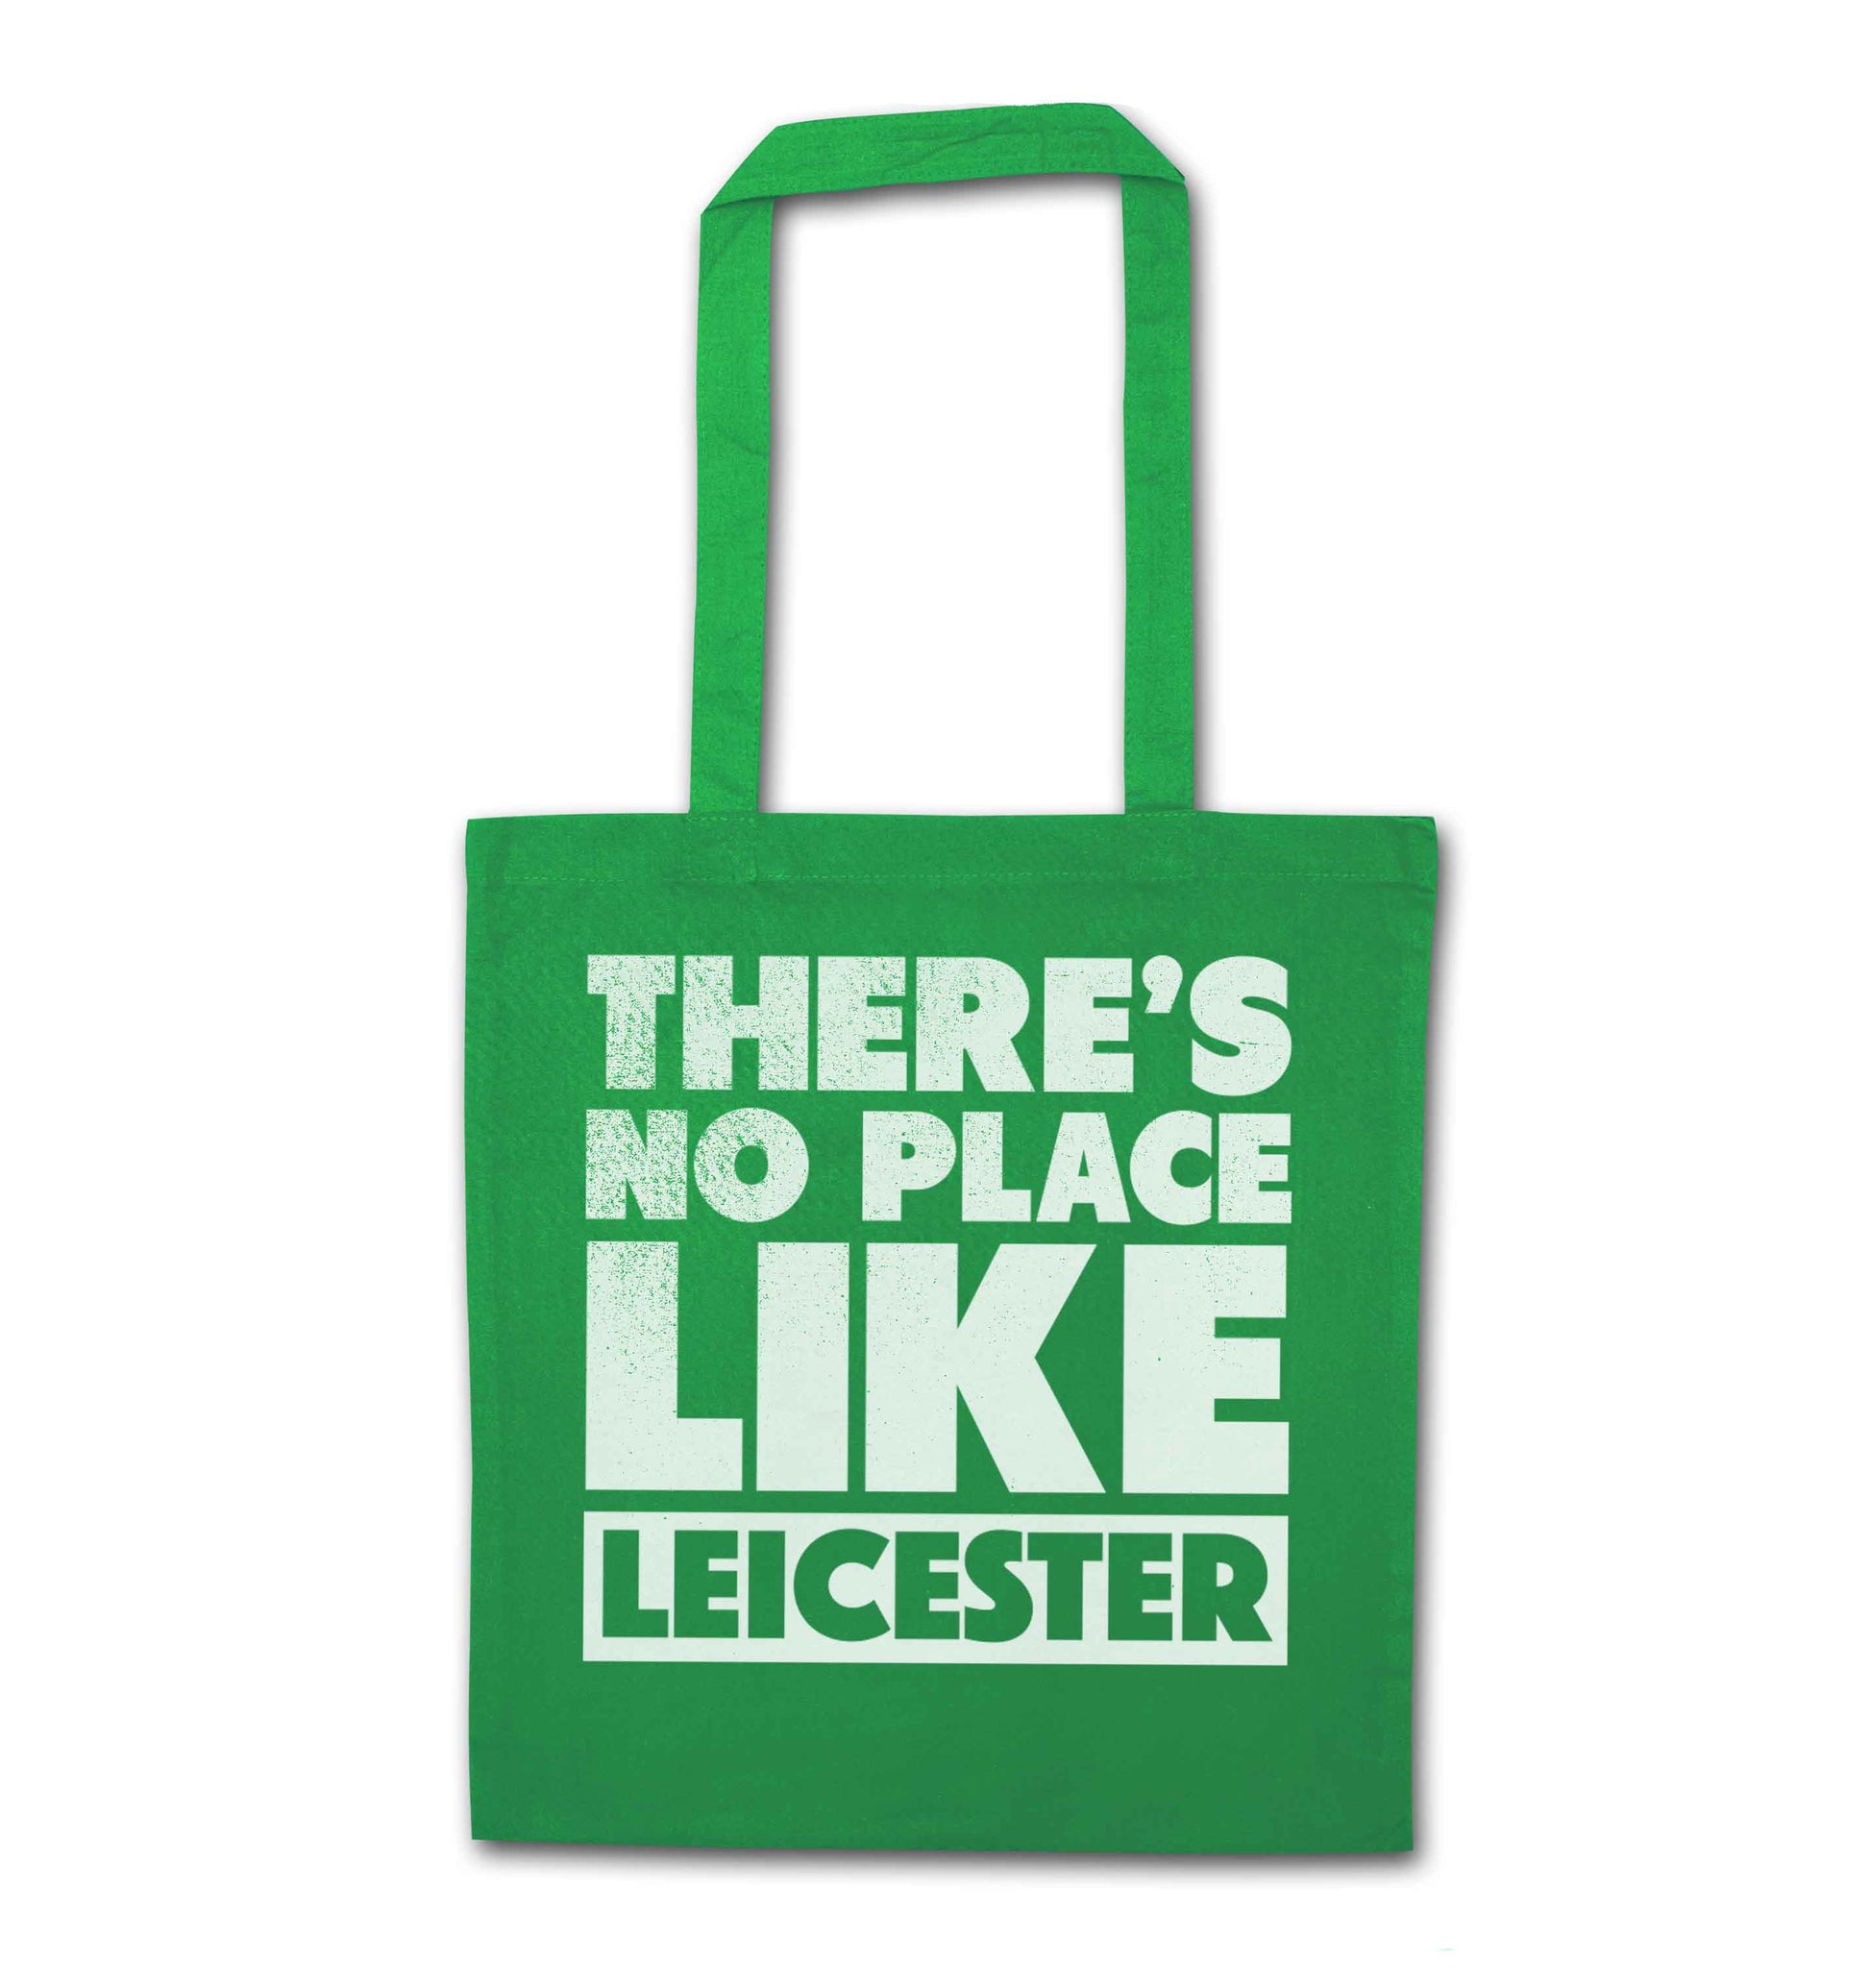 There's no place like Leicester green tote bag